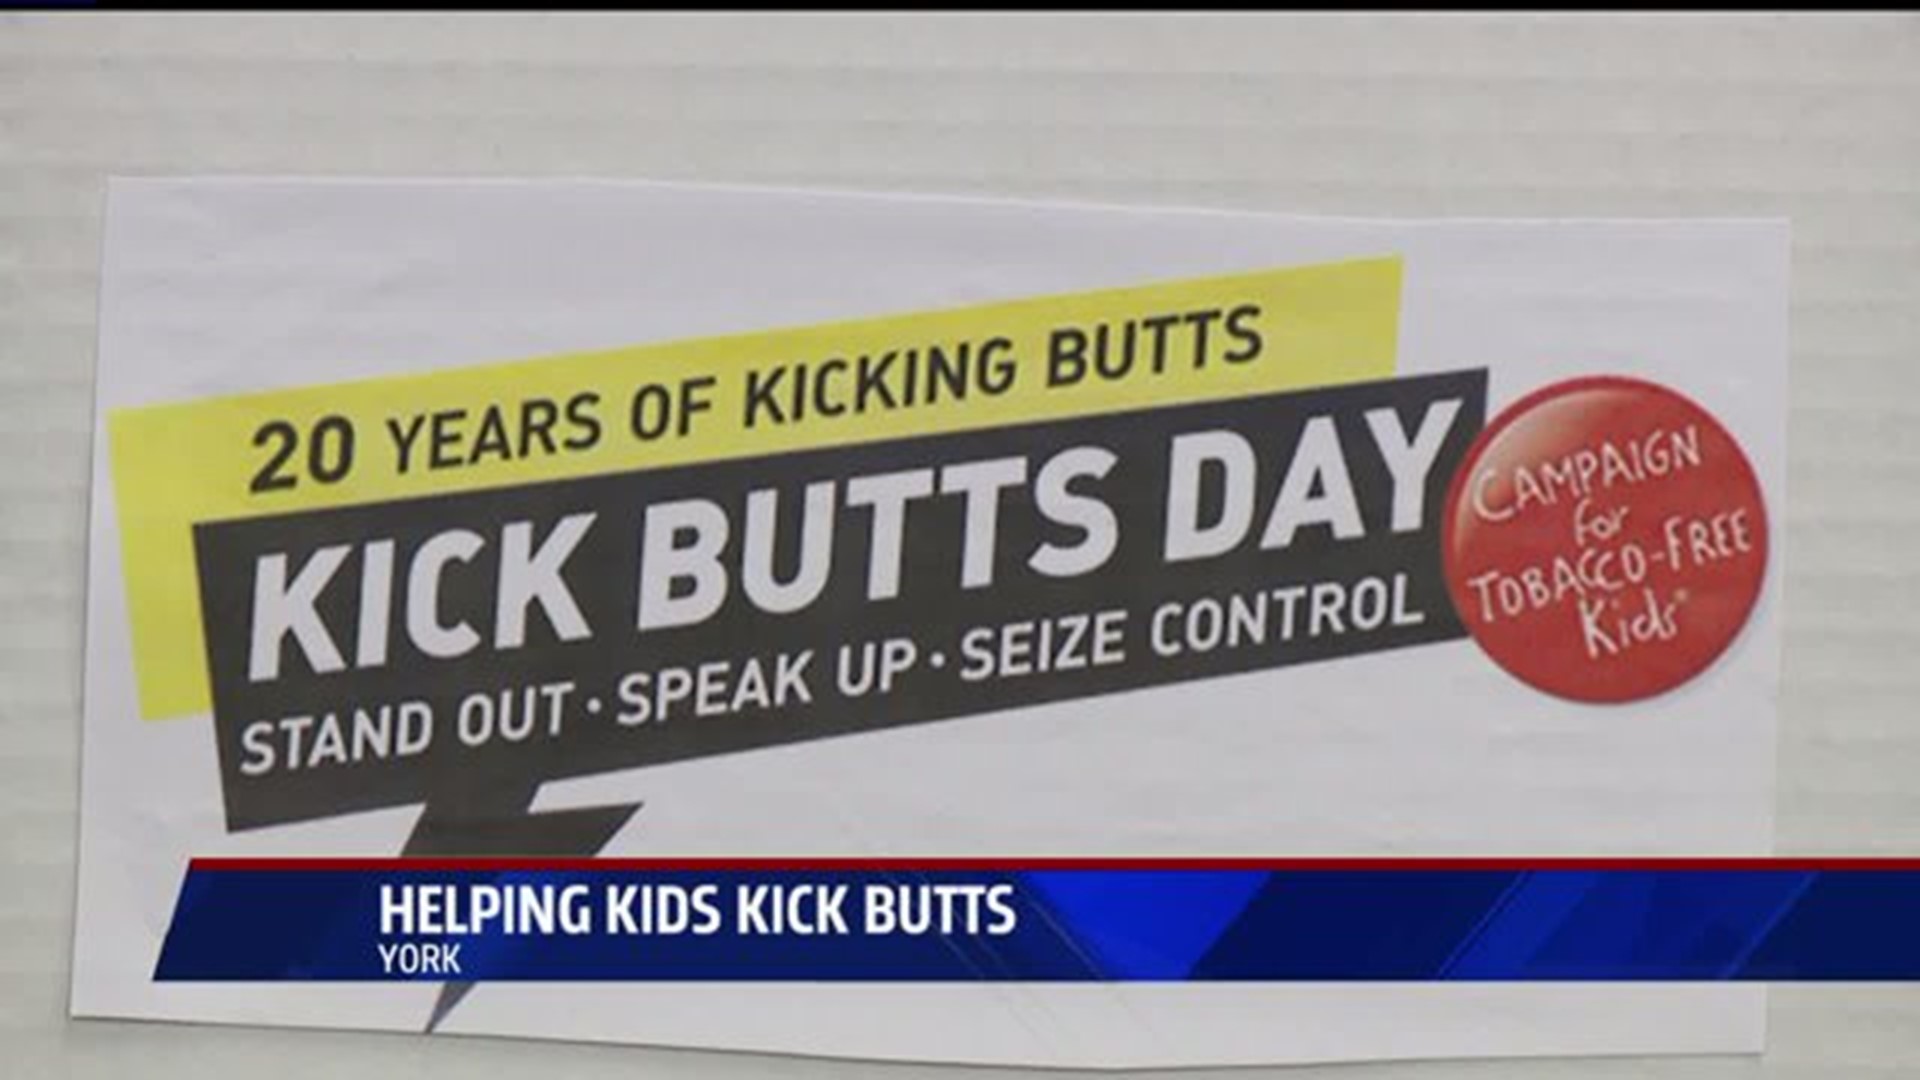 Helping kids kick butts day in York County